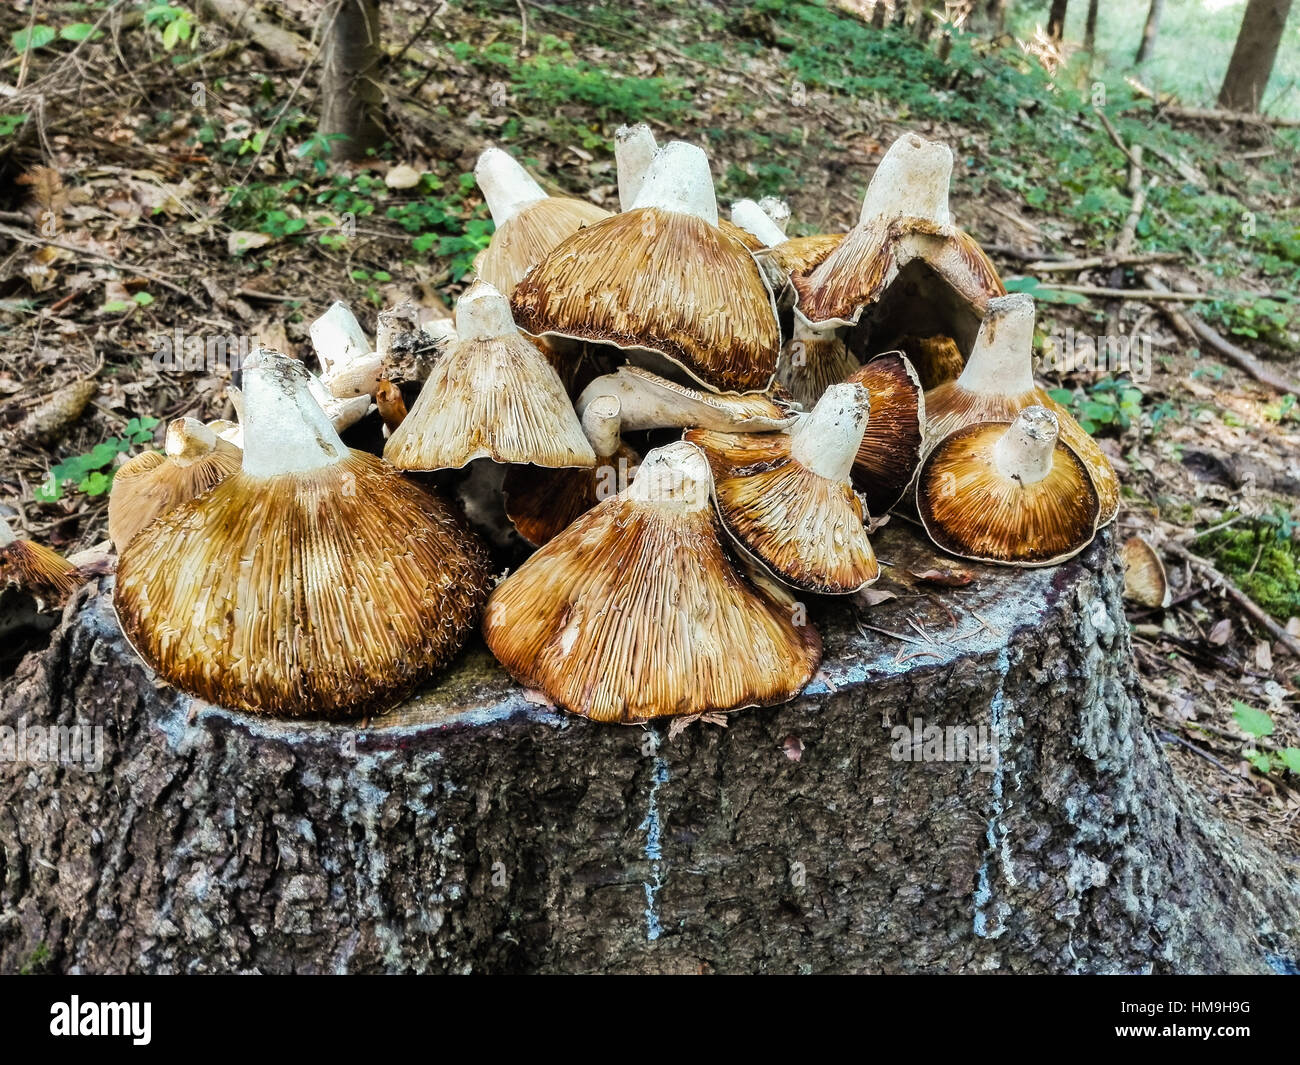 Lots of poisonous mushrooms in forest. Stock Photo